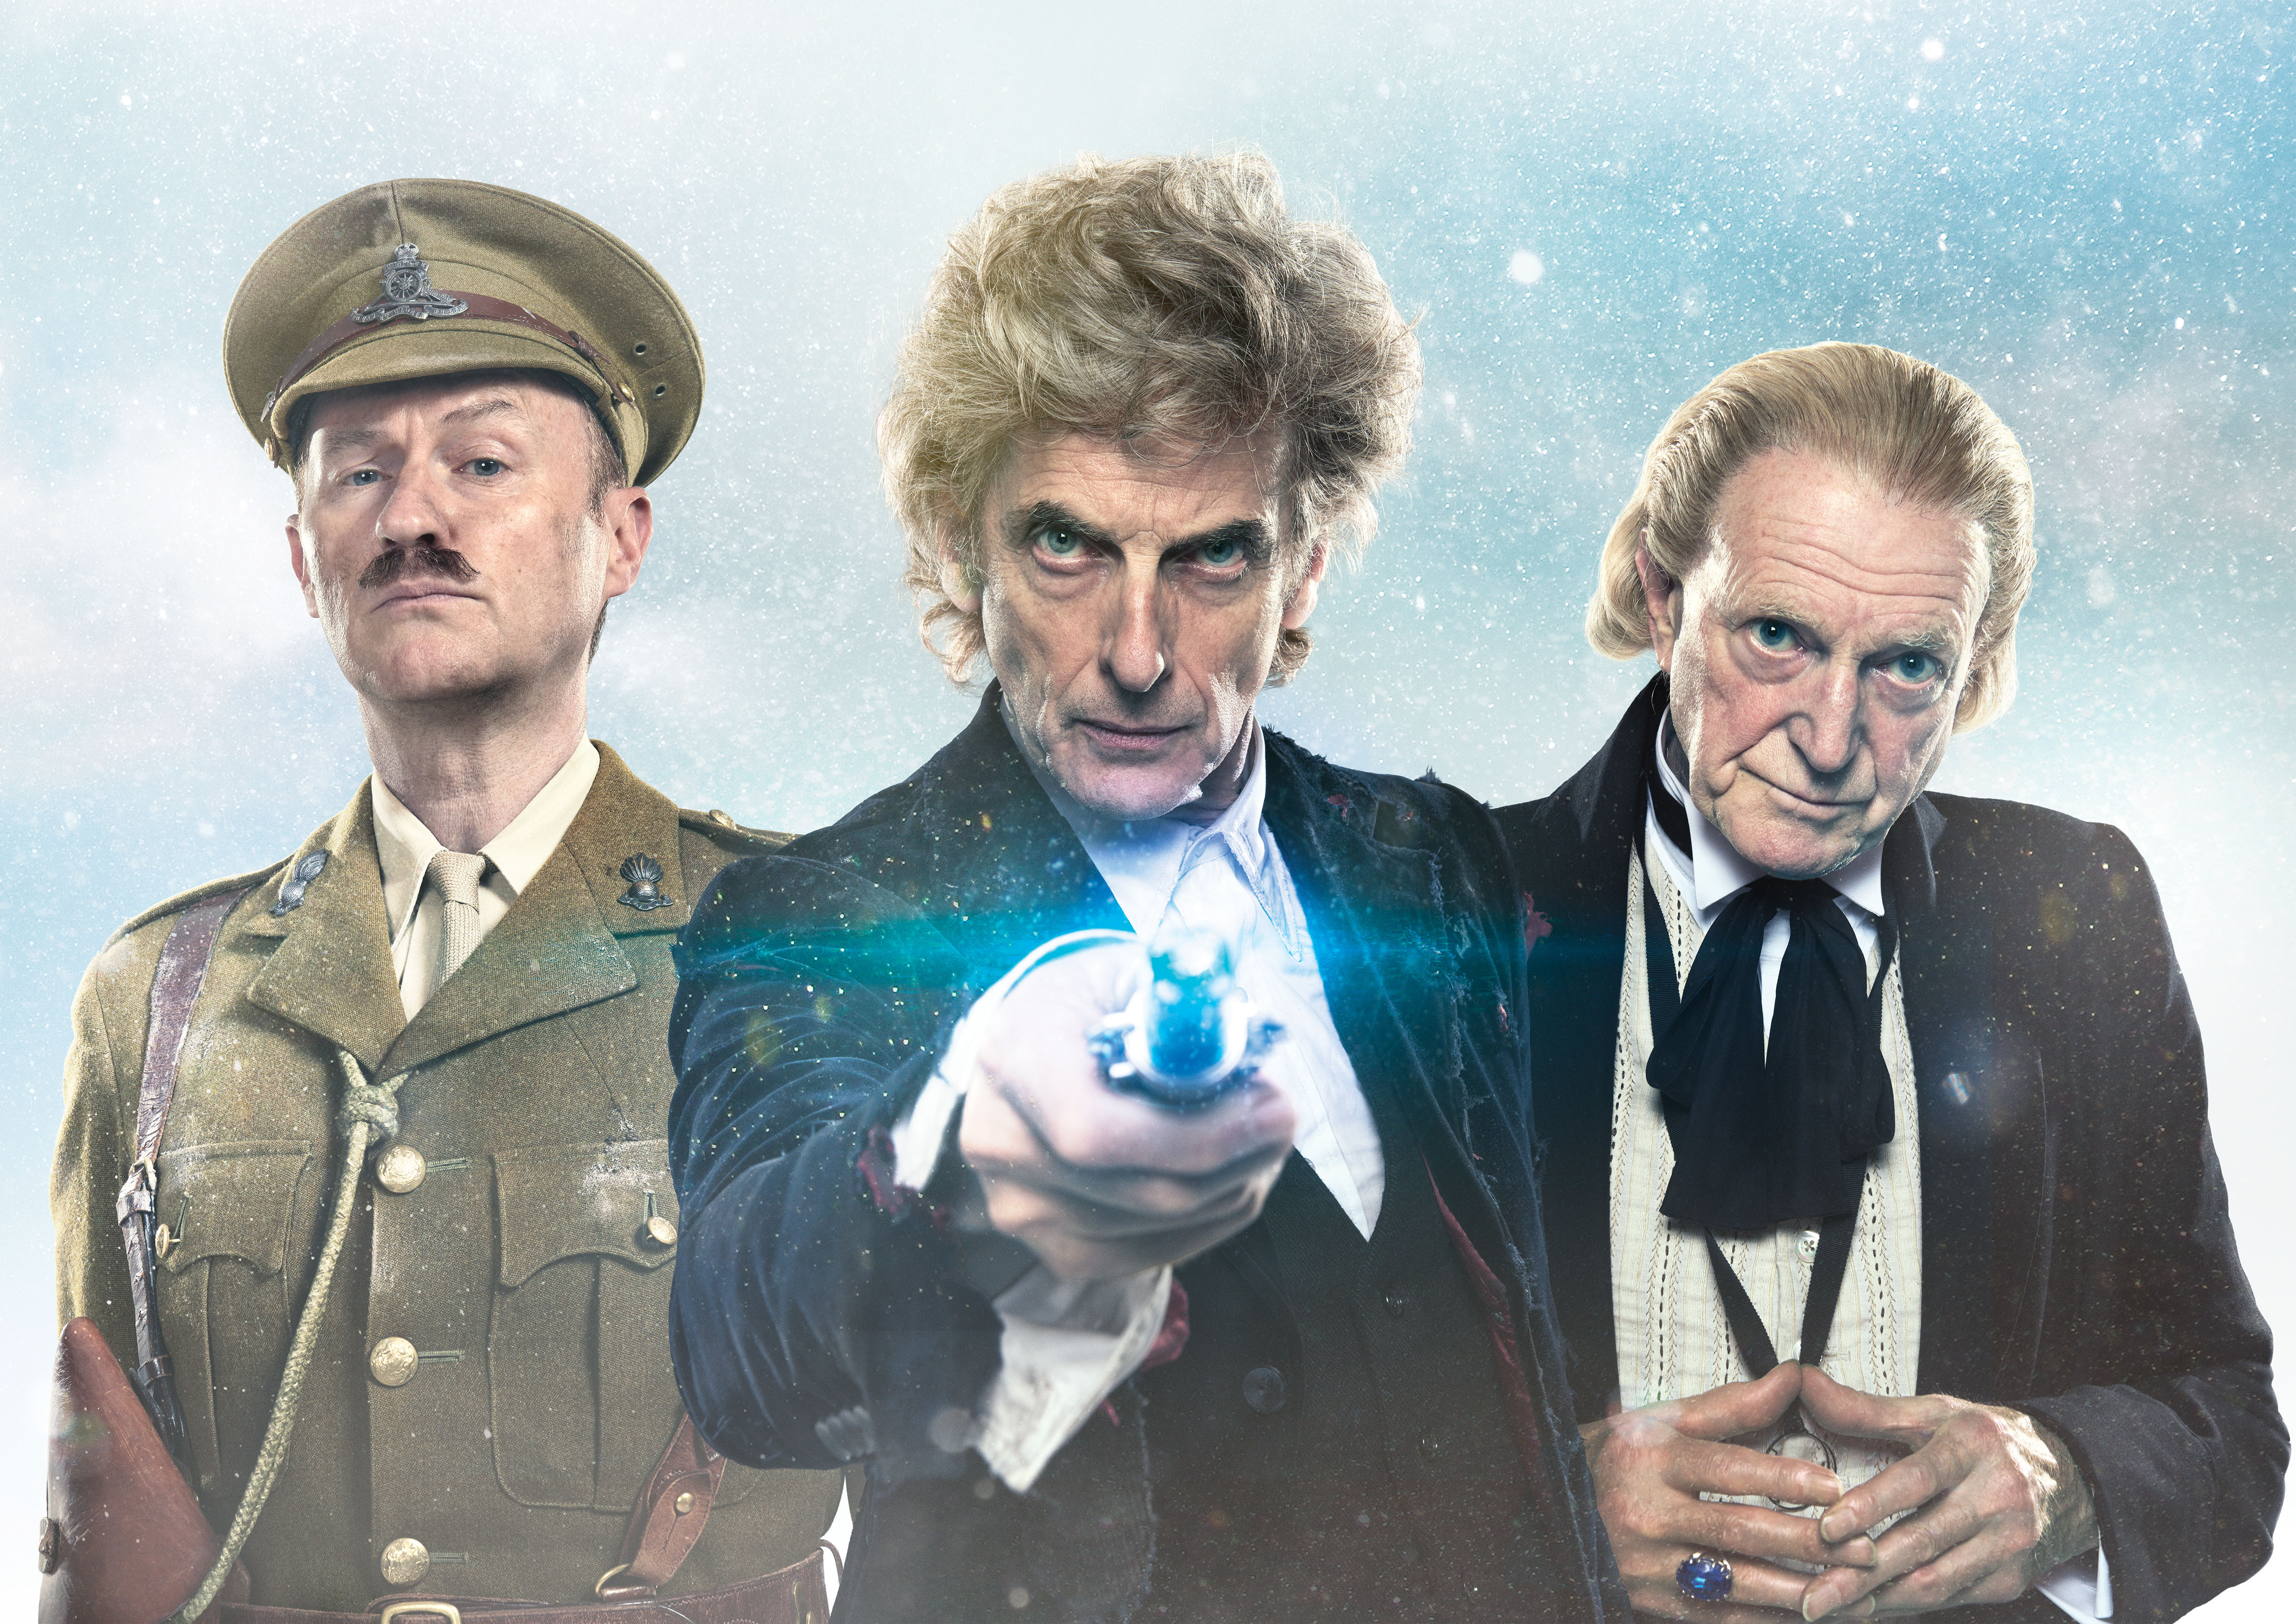 The 2017 Christmas special of Doctor Who will feature Peter Capaldi as The Doctor, Mark Gatiss as The Captain and David Bradley as The First Doctor